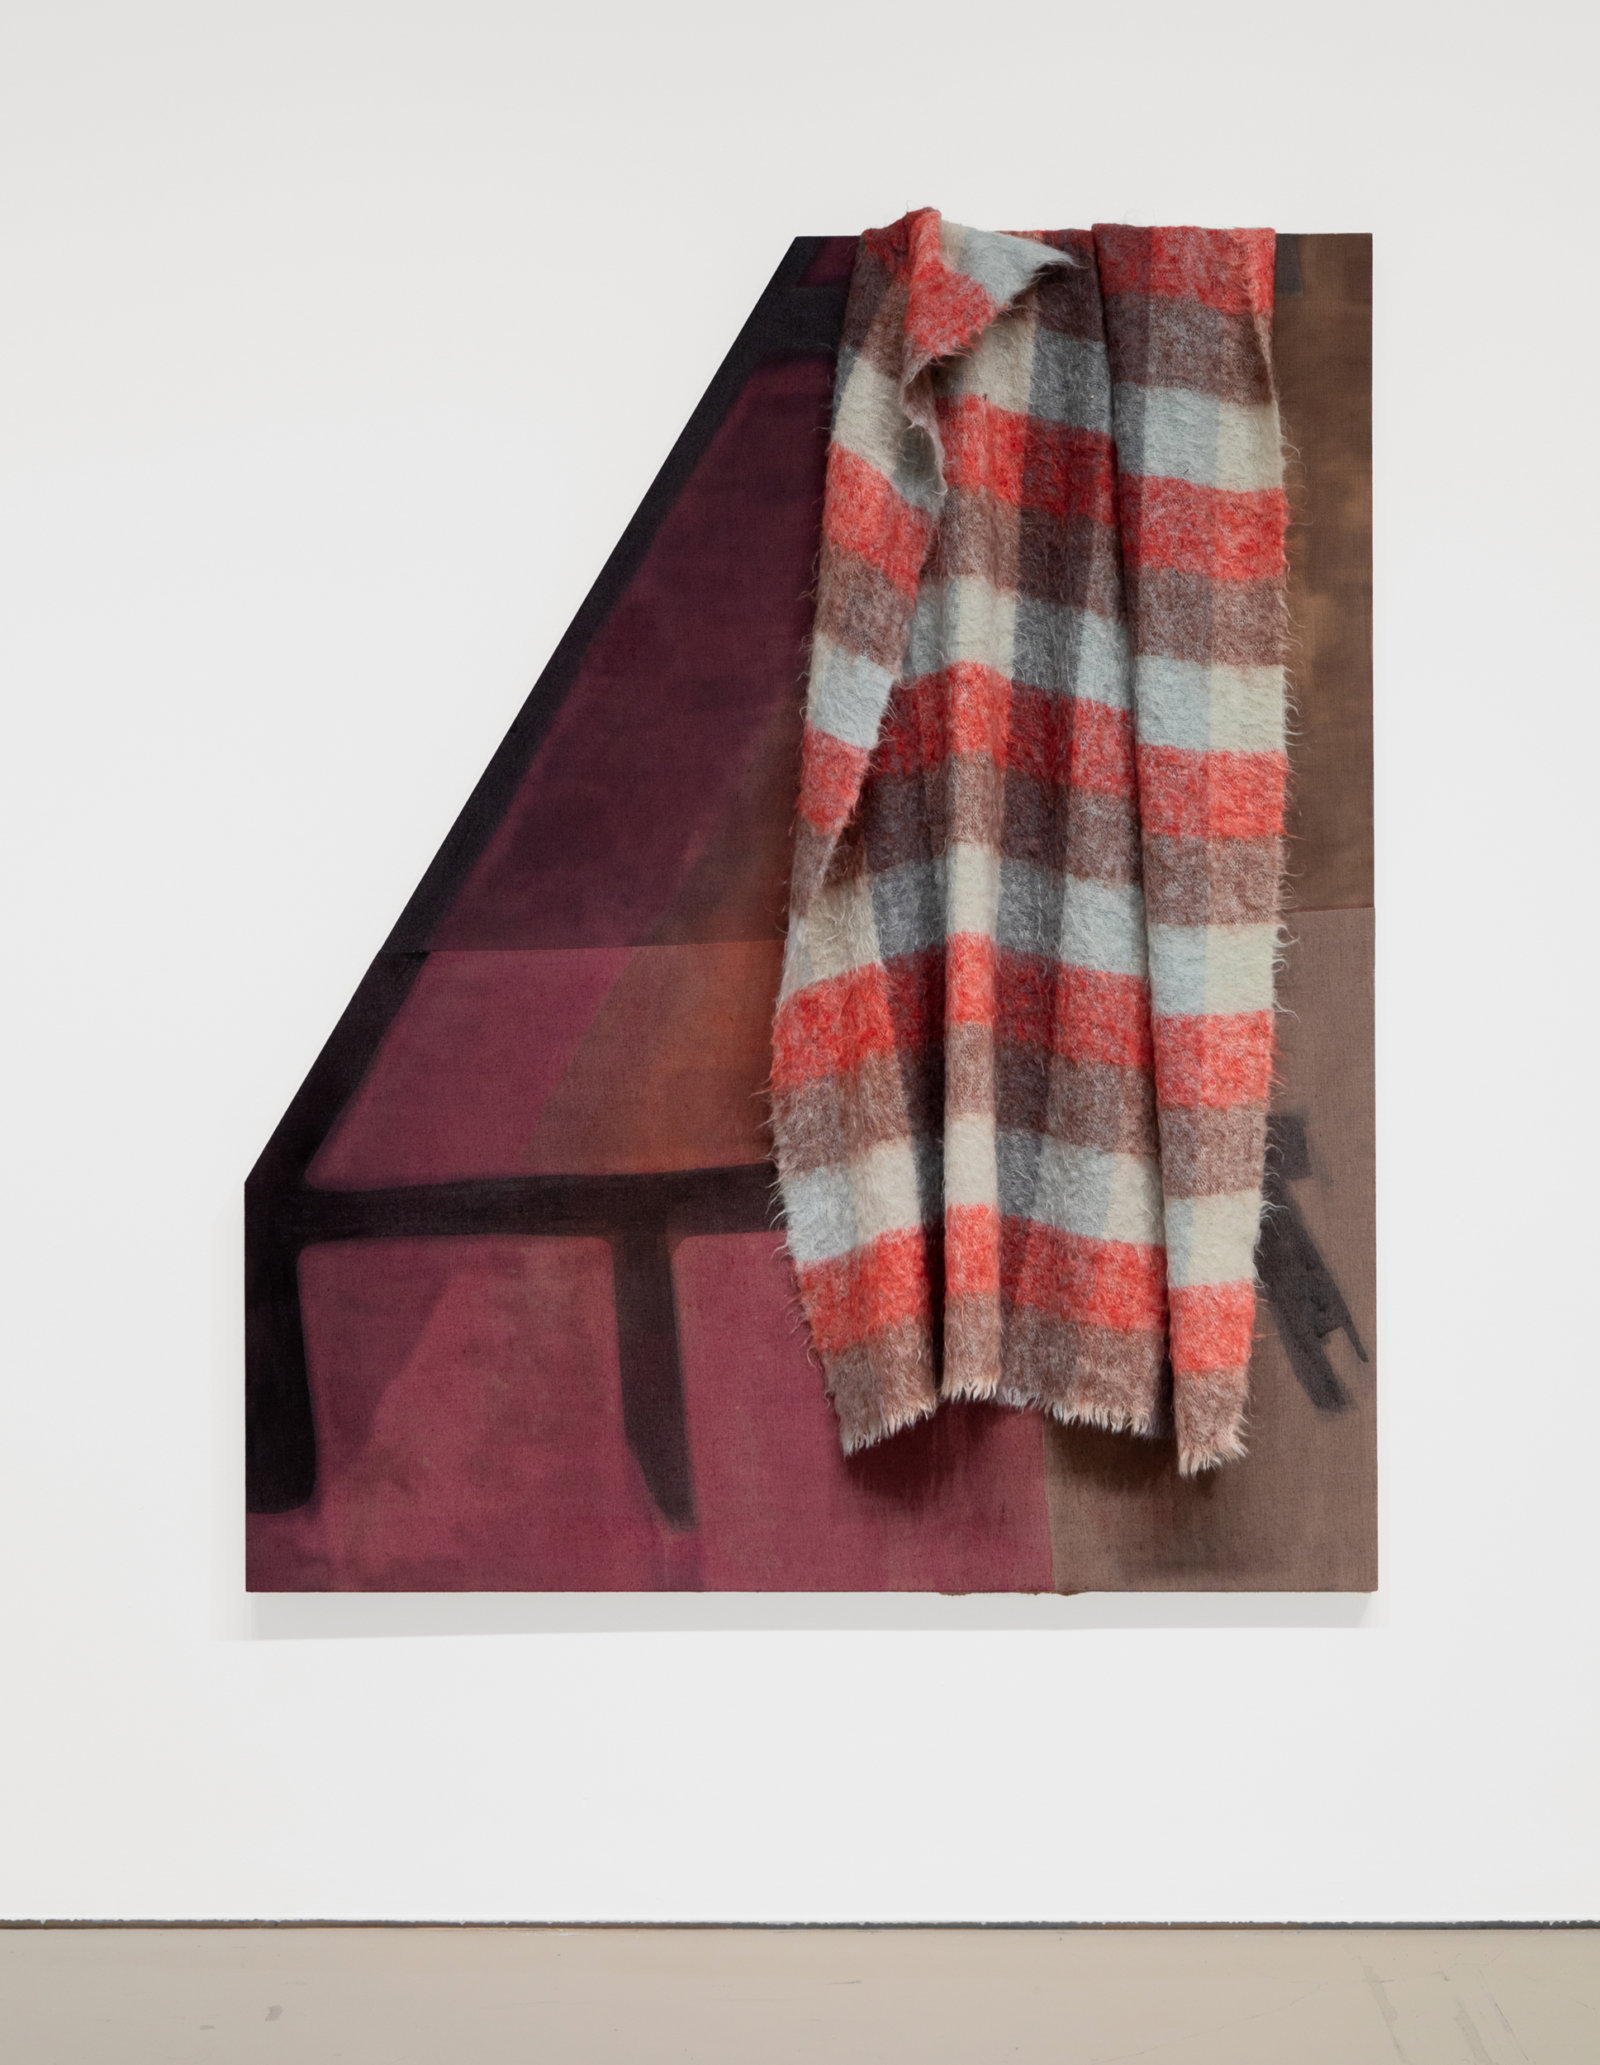 Duane Linklater, they have piled the stone / as they promised / without syrup 4, 2023, digital print on linen, cochineal, tea, sumac, charcoal, wool blanket, 72 x 60 in. (183 x 152 cm)